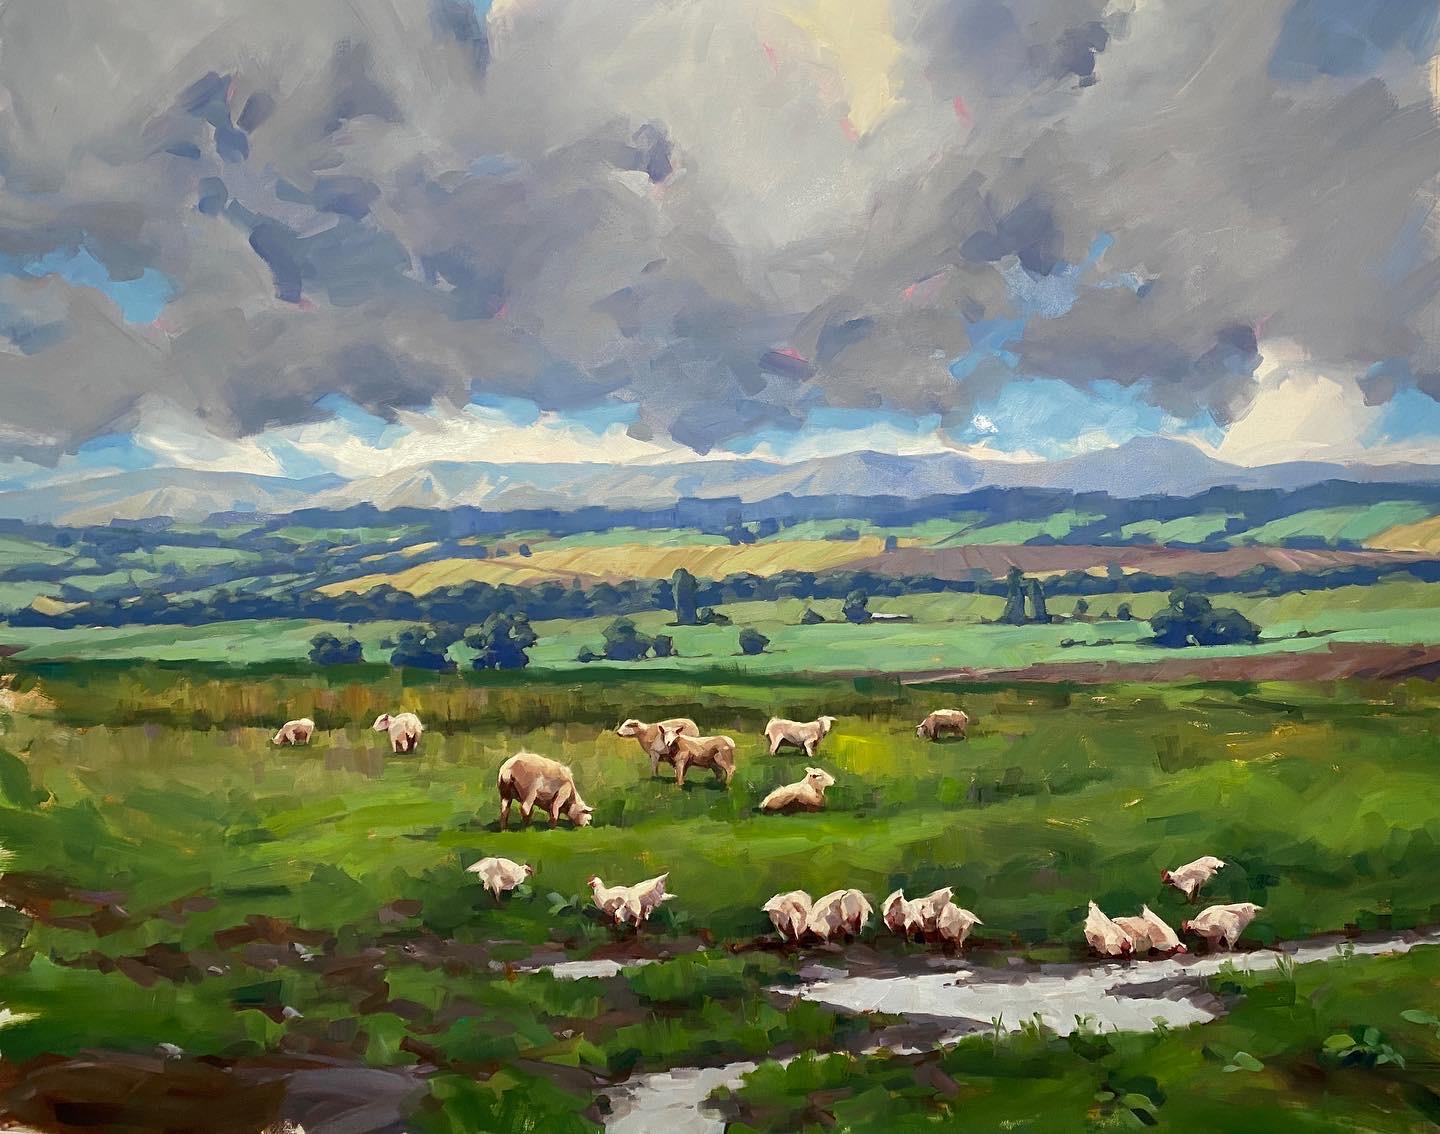 Judd Mercer Figurative Painting - "Open Grazing, " Oil painting